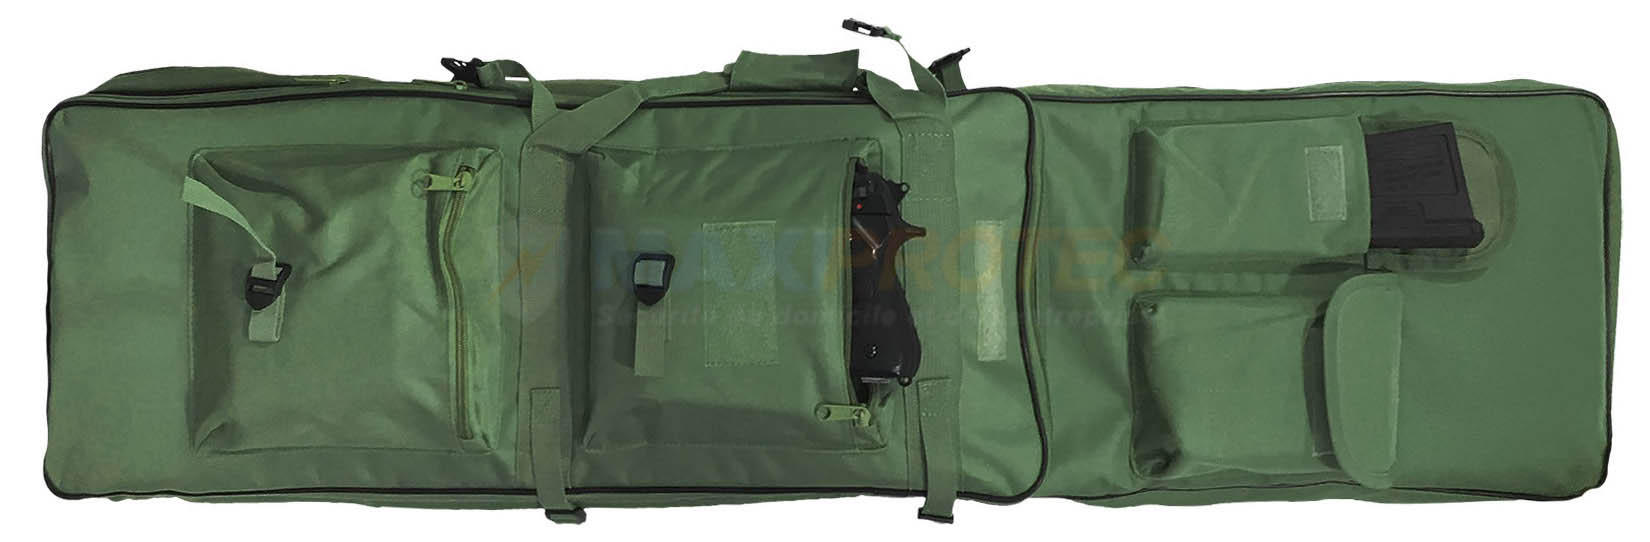 Green Carrying Case for Rifles